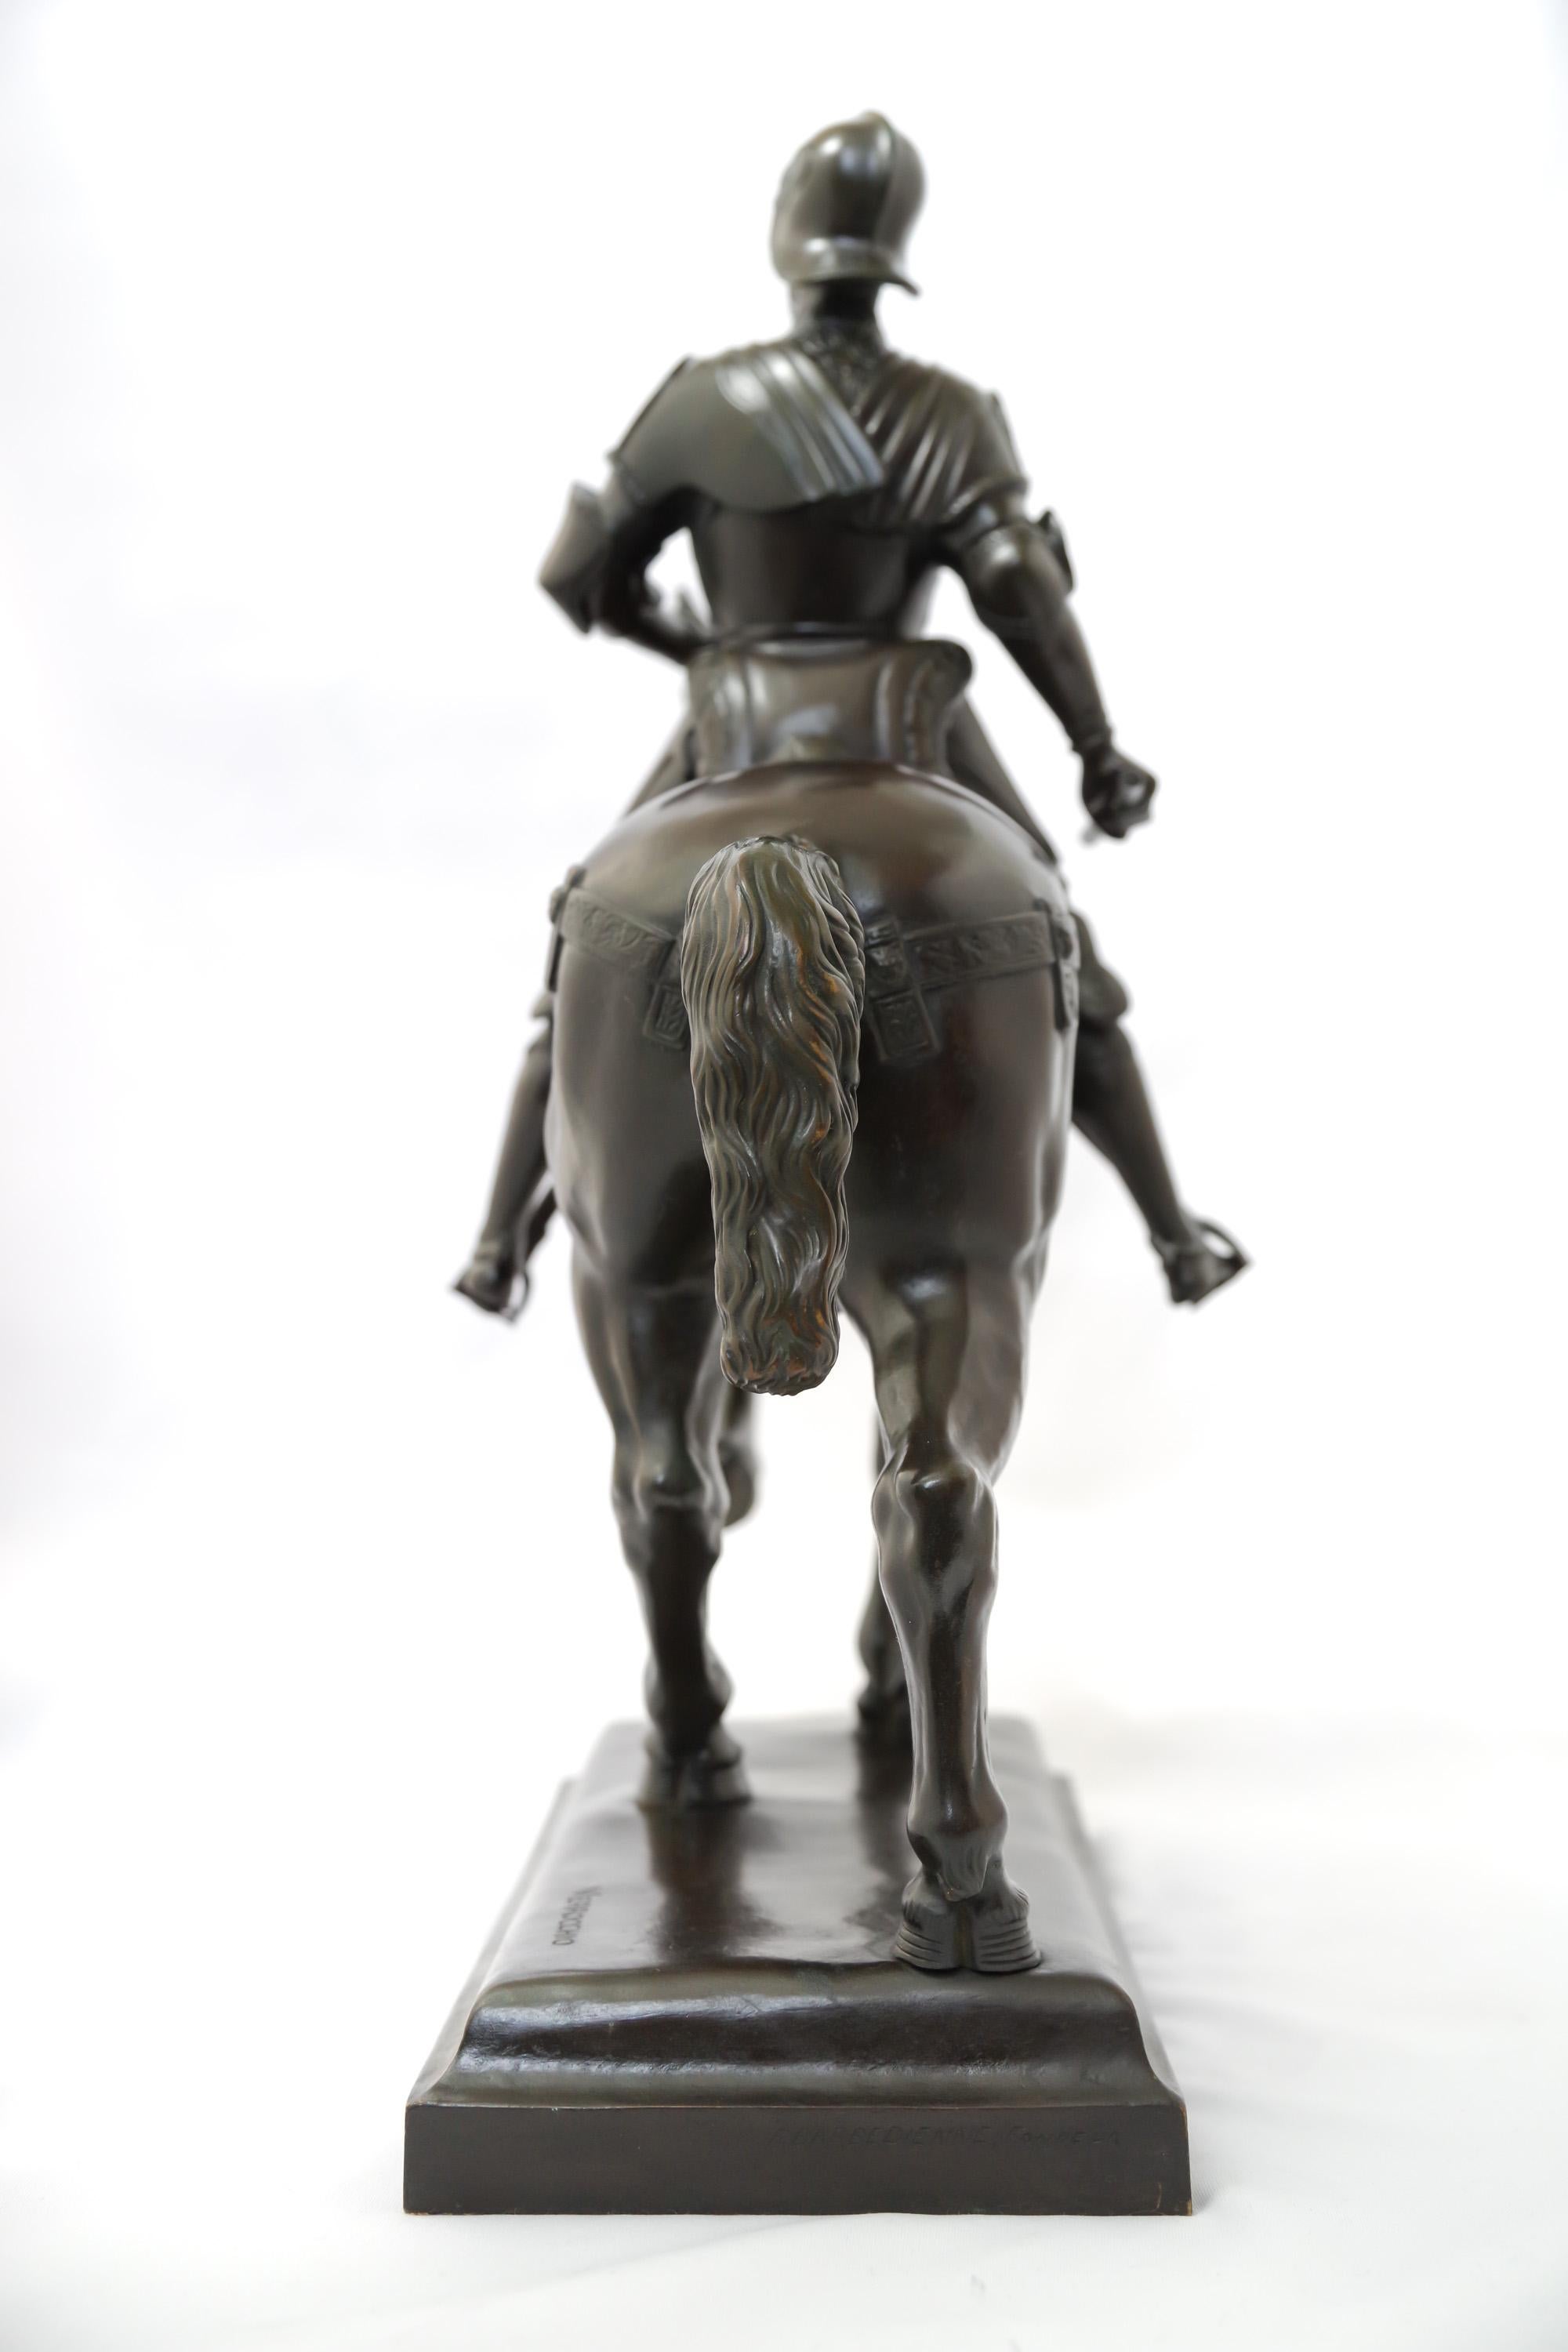 French 19th Century Bronze Equestrian Sculpture of Colleoni by Barbedienne Foundry